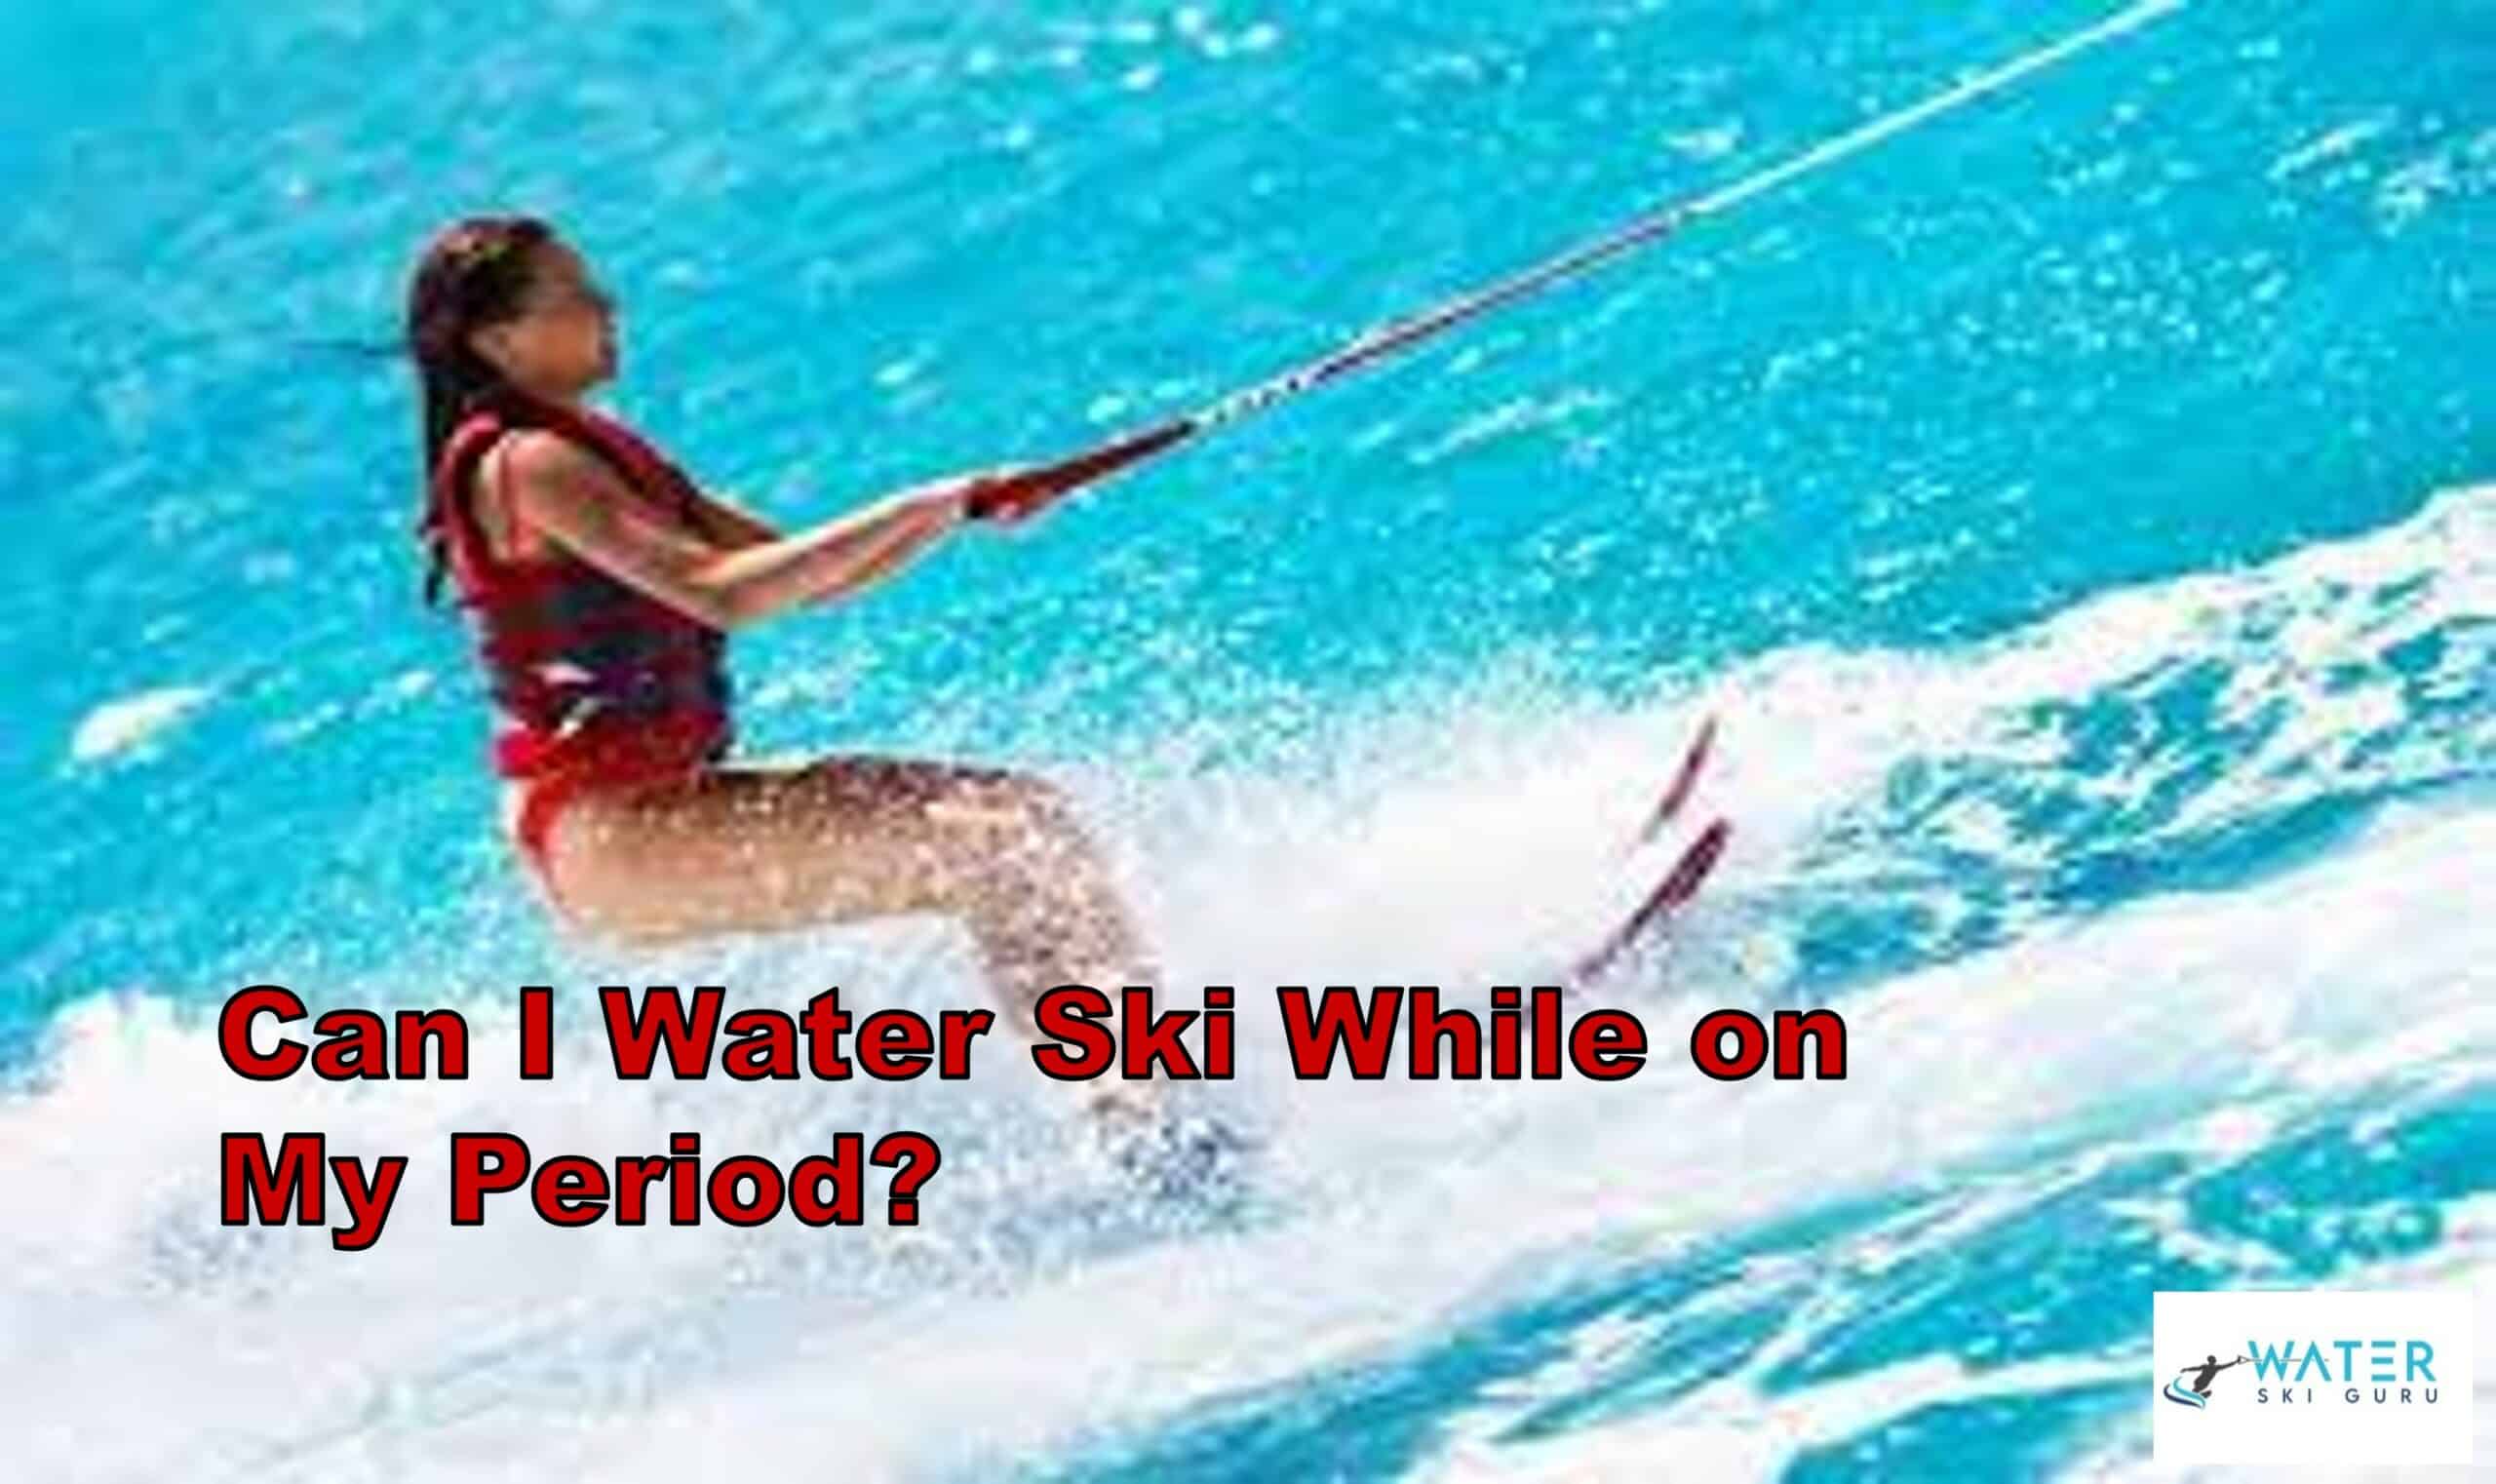 Can I Water Ski While on My Period